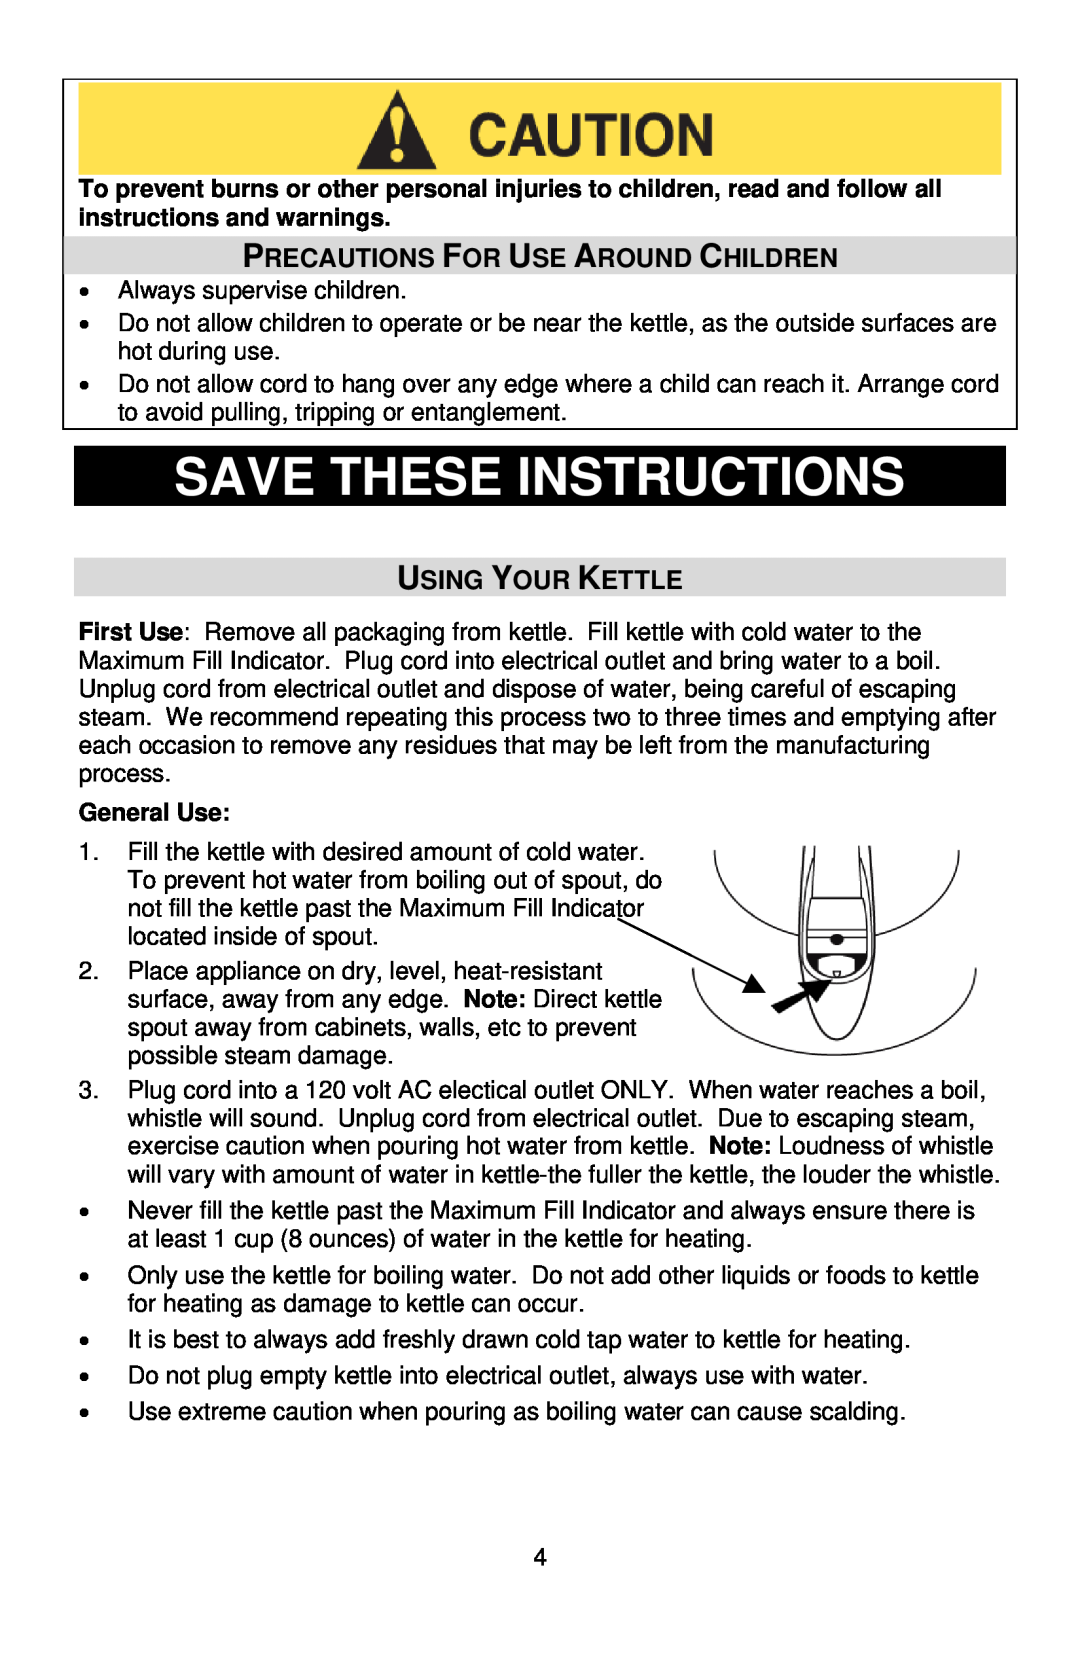 West Bend 6400 Save These Instructions, Precautions For Use Around Children, Using Your Kettle, General Use 